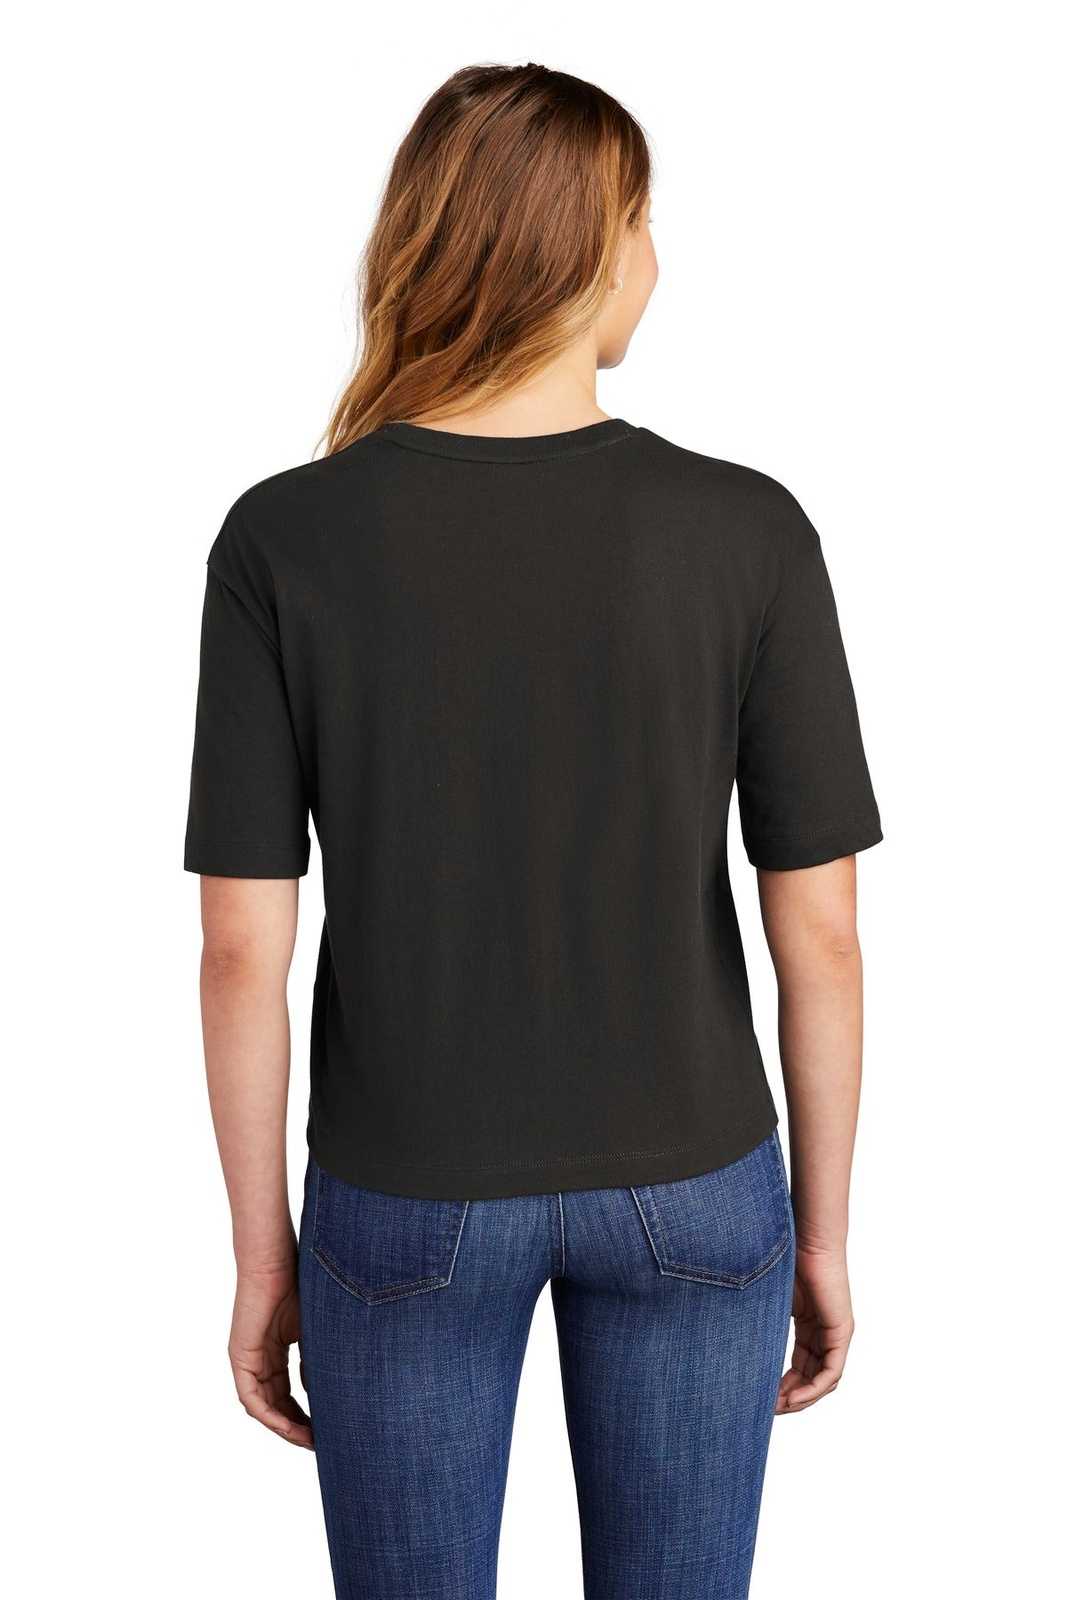 District DT6402 Women's V.I.T. Boxy Tee - Black - HIT a Double - 1